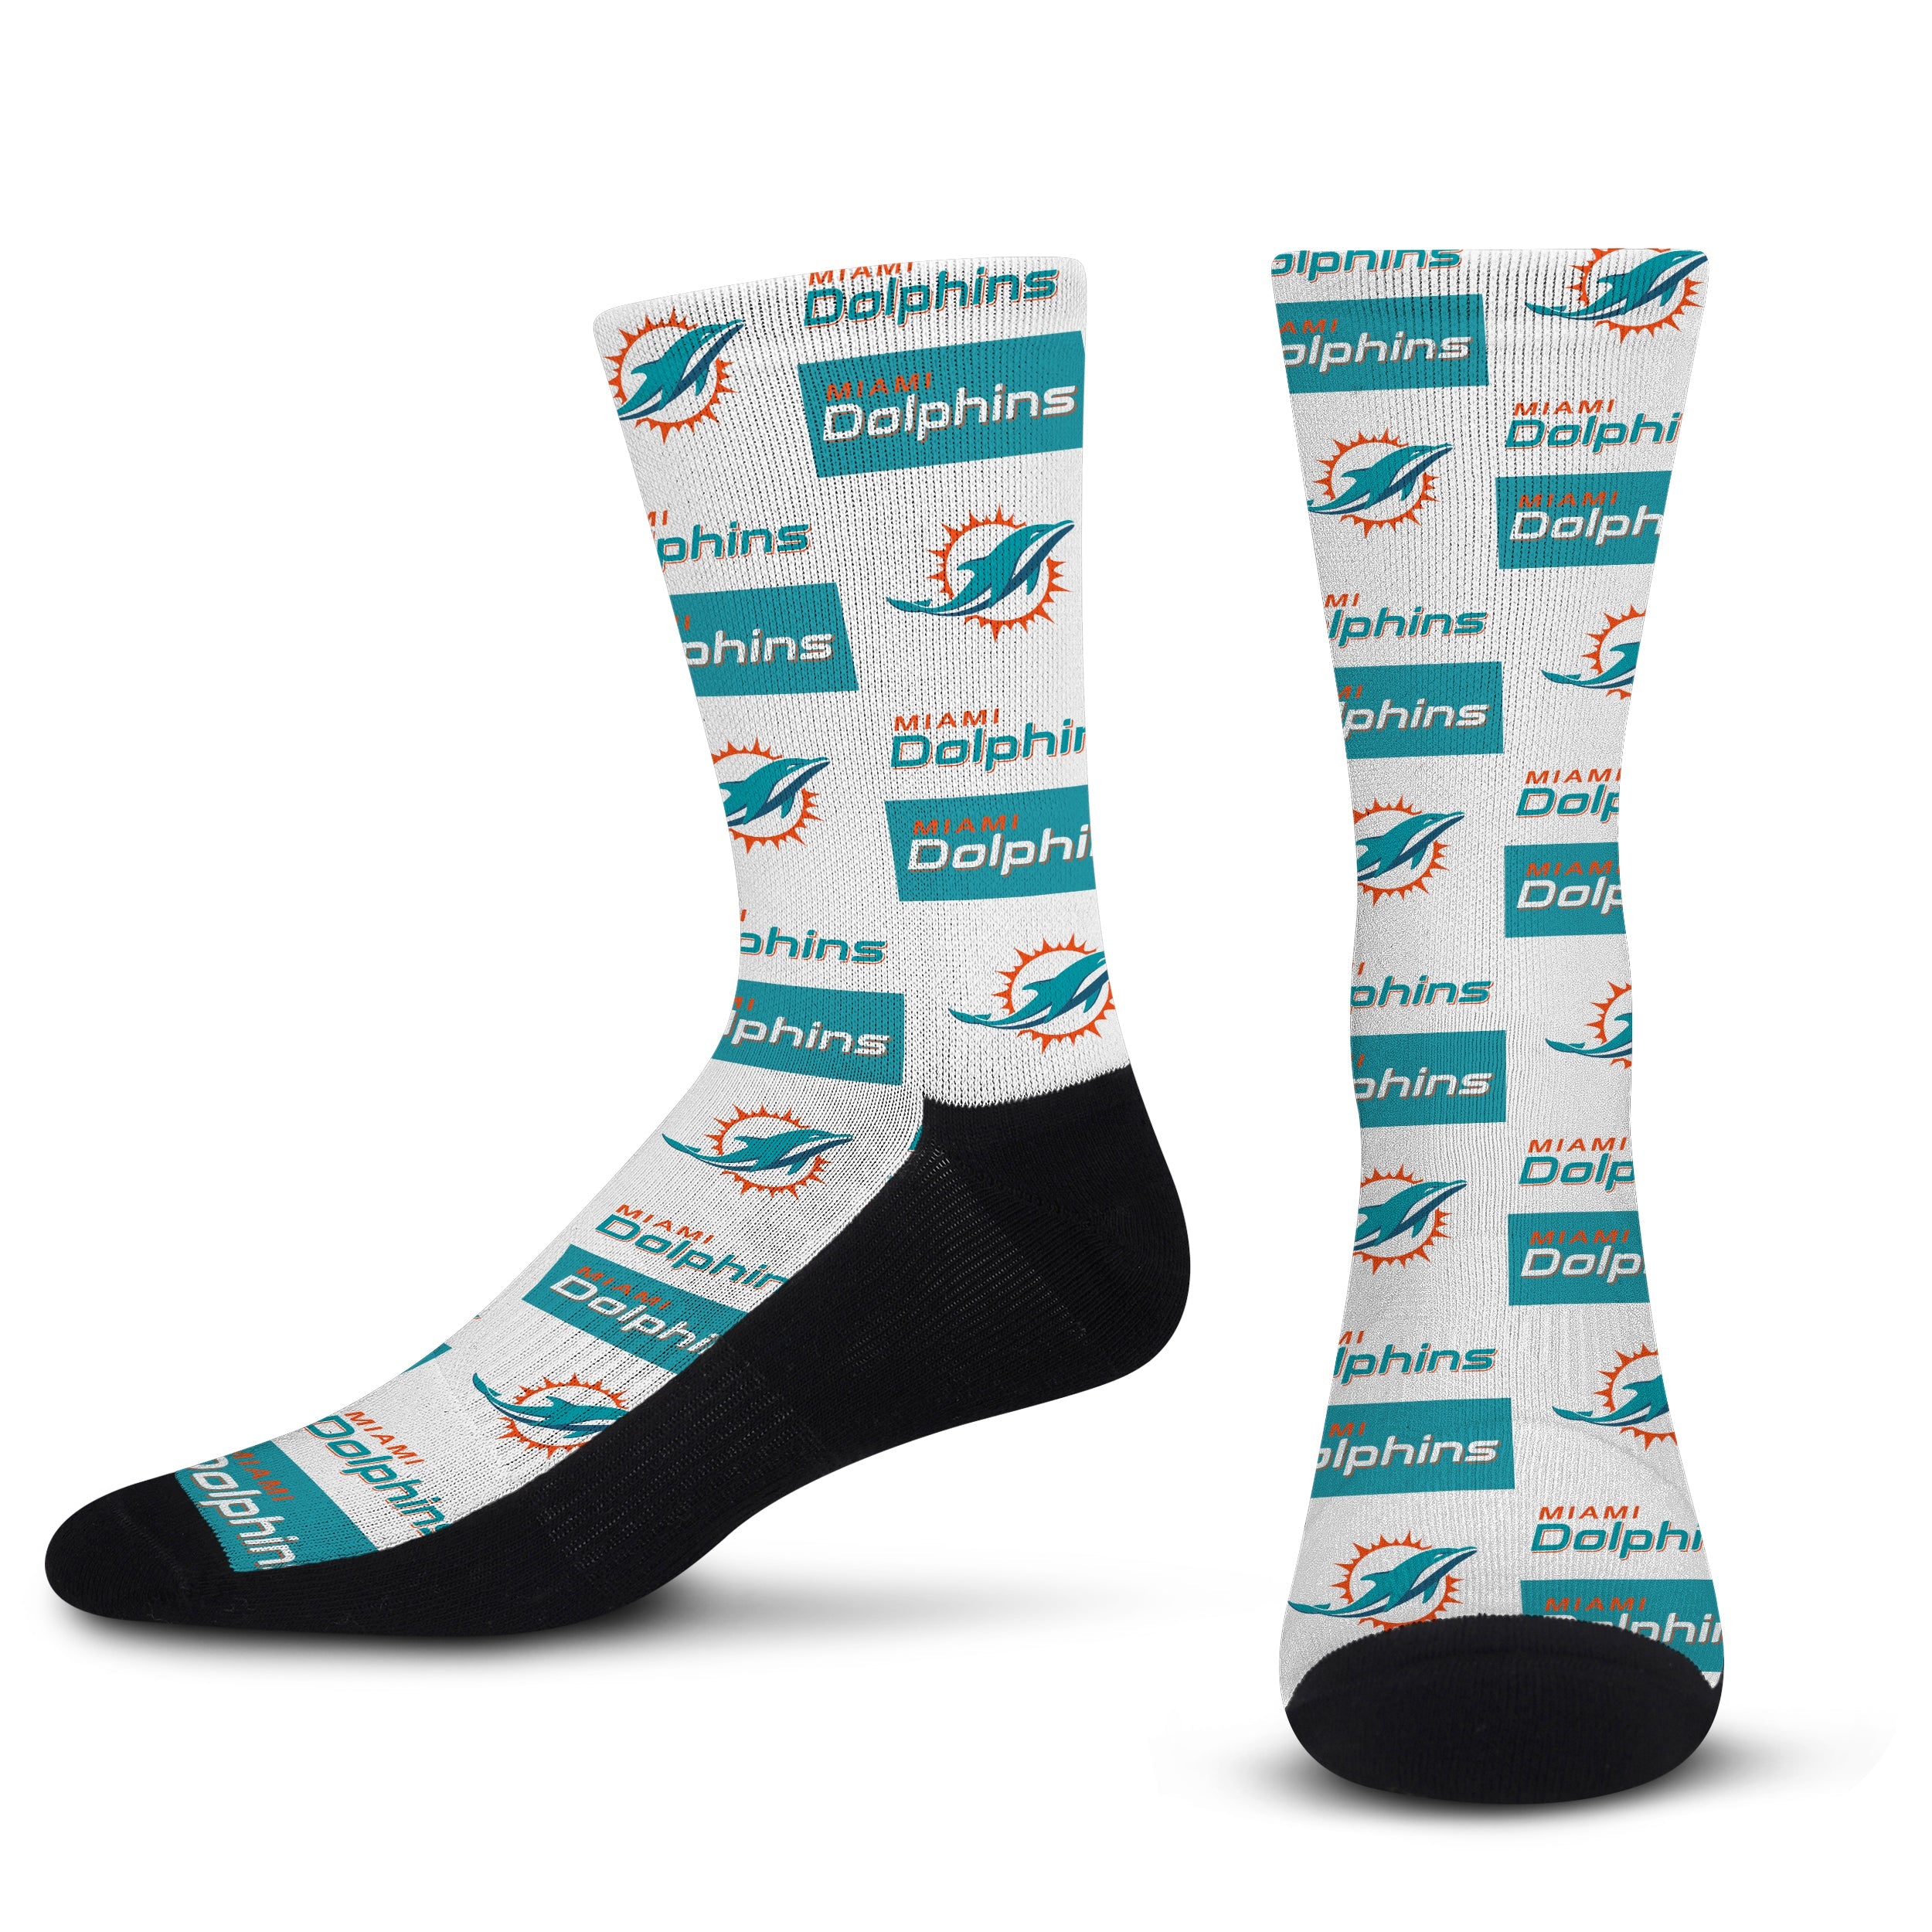 Miami Dolphins - Poster Print – For Bare Feet